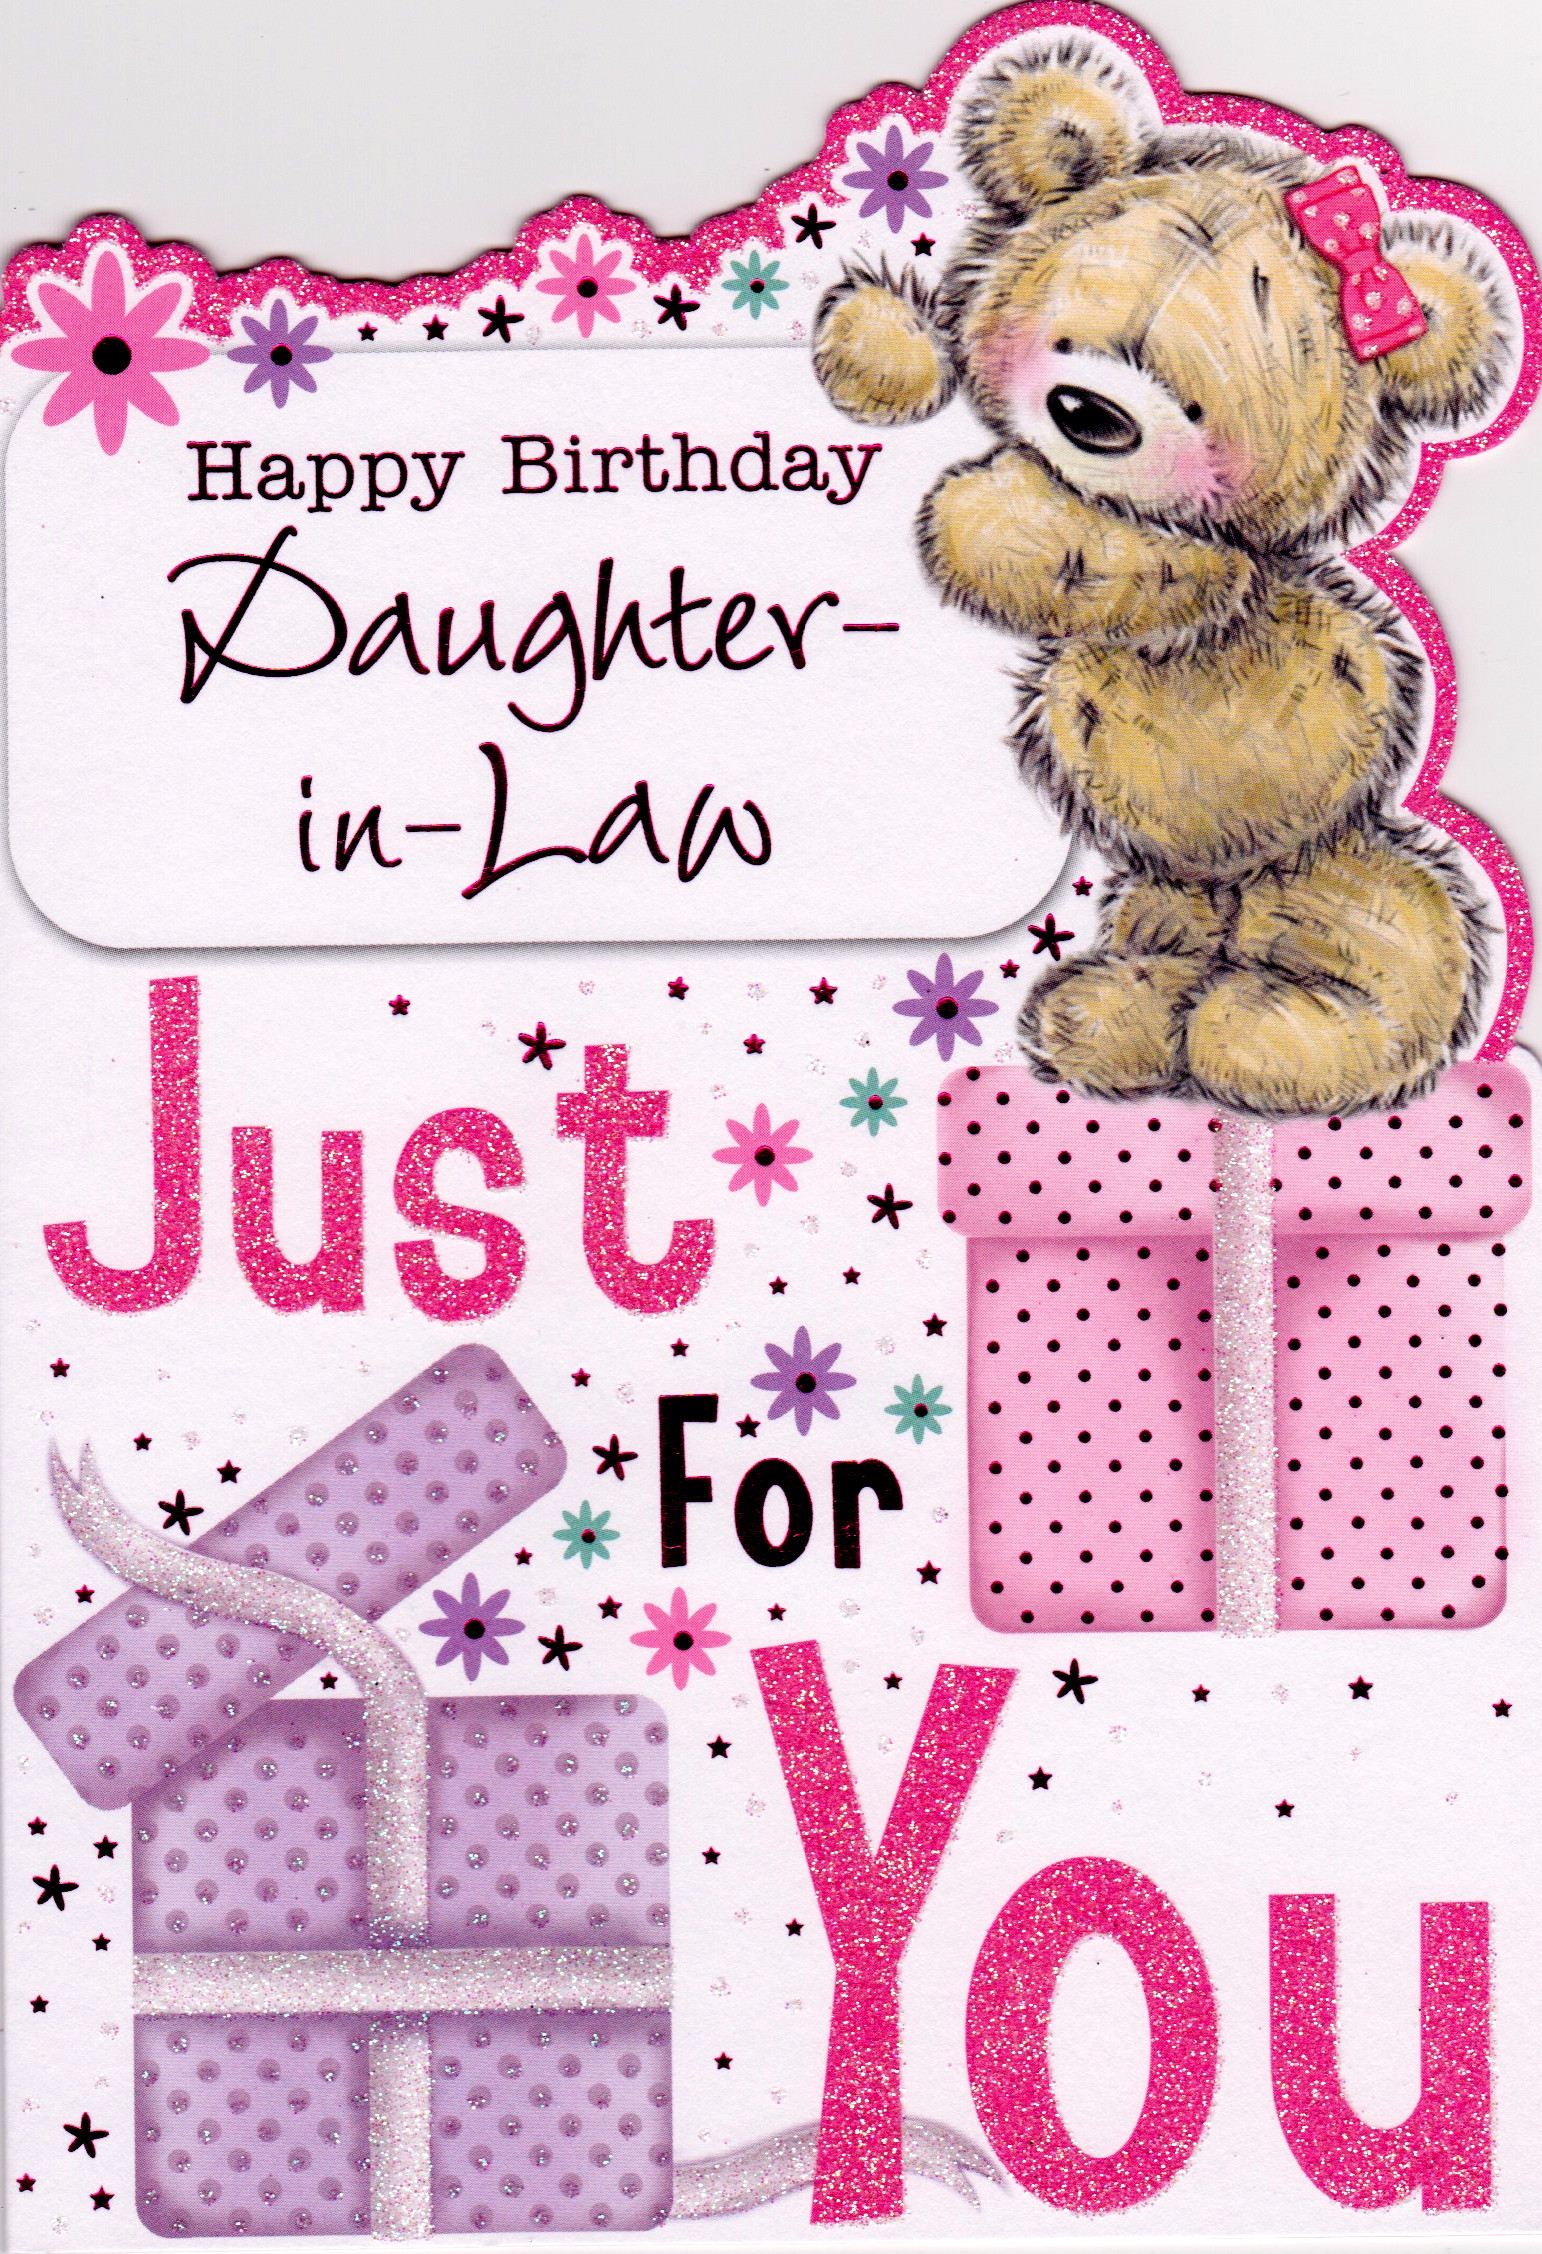 Birthday Images With Quotes
 Happy Birthday Daughter In Law Quotes QuotesGram